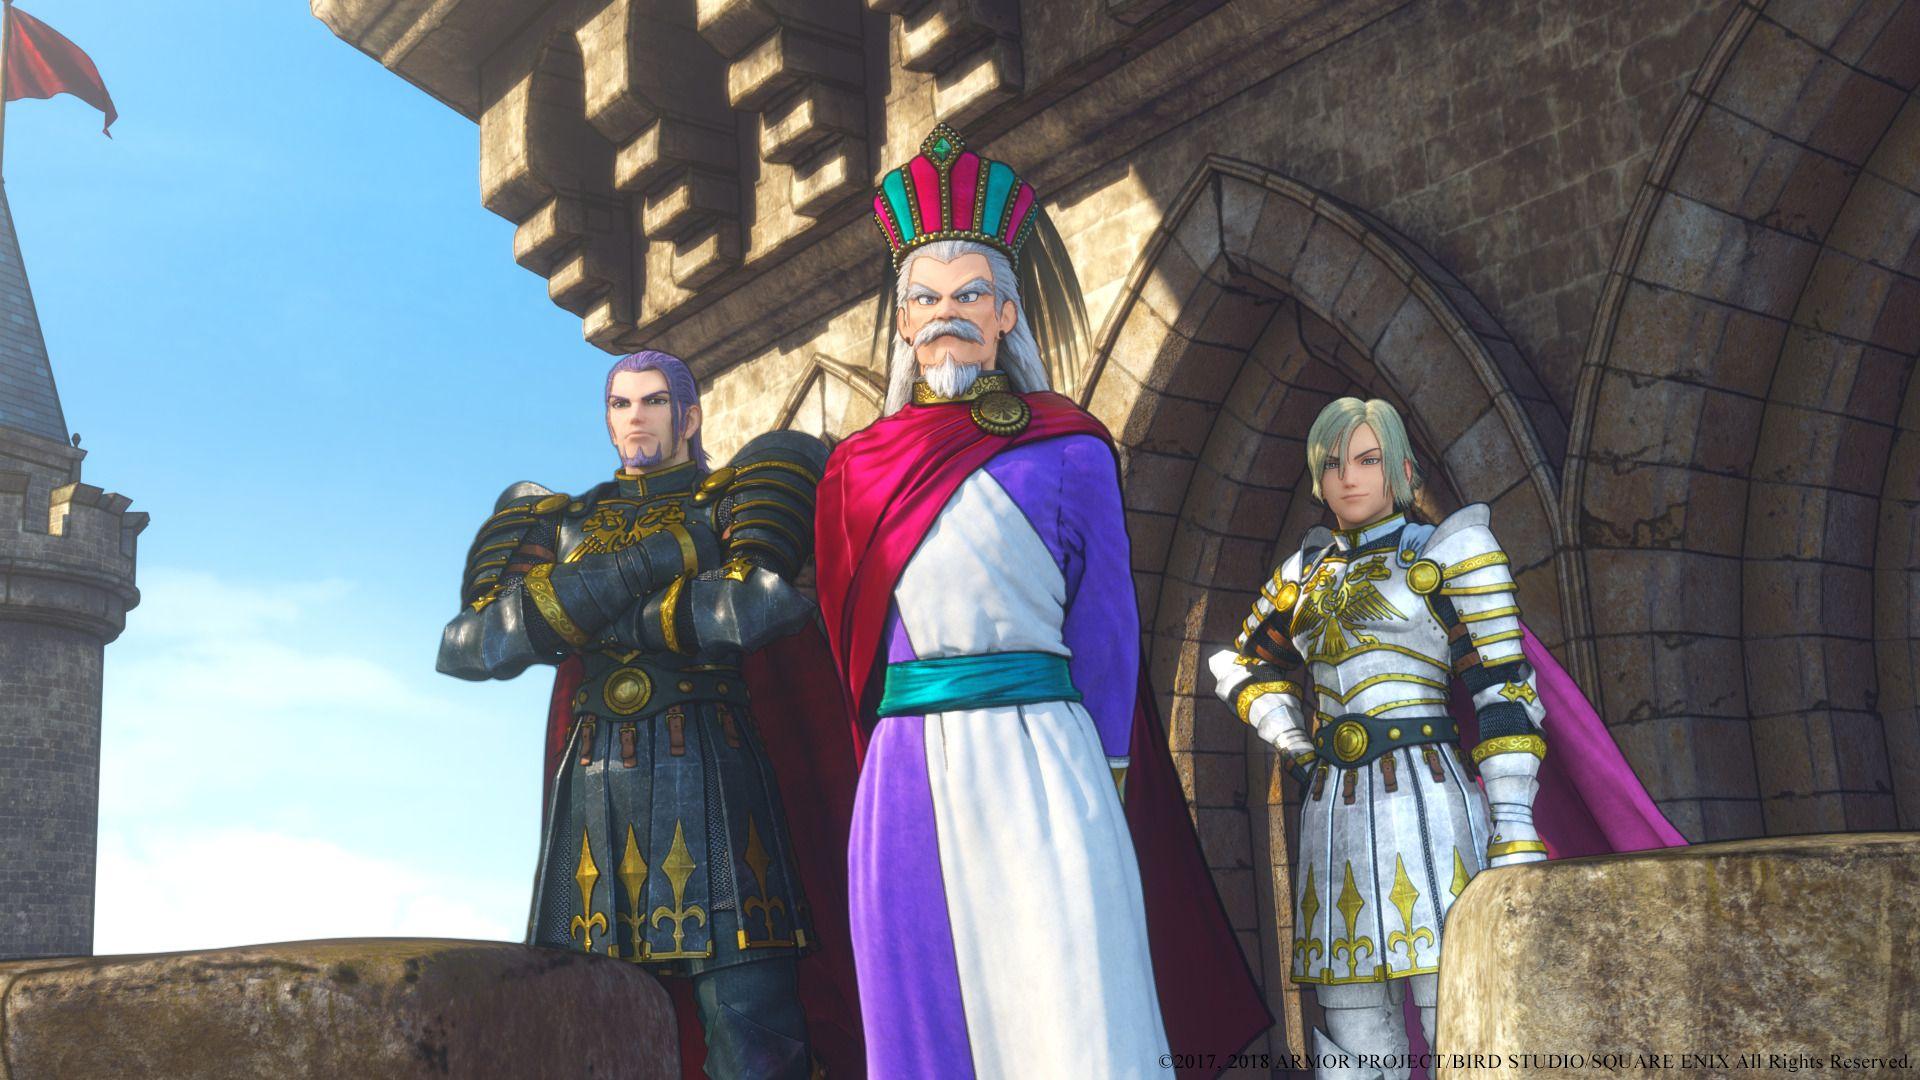 DRAGON QUEST XI: Echoes of an Elusive Age is coming to the PC